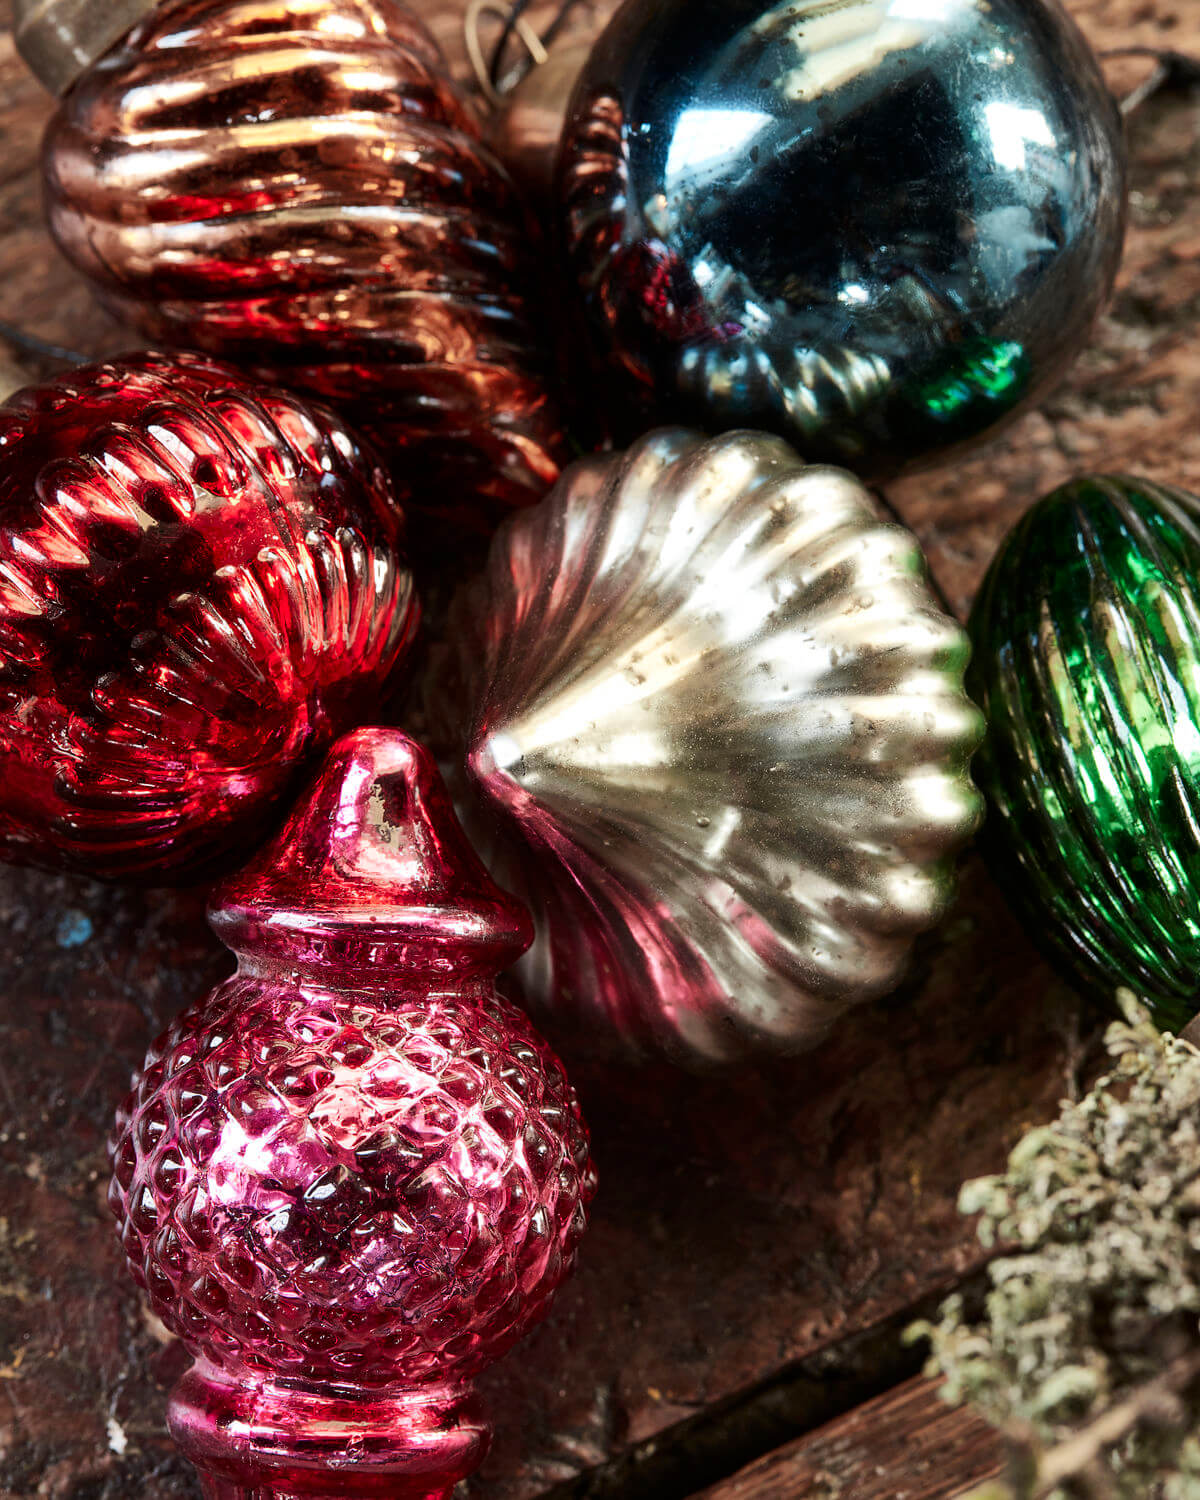 Bunch Ornaments - Set of 6 | Multi | Glass | by House Doctor - Lifestory